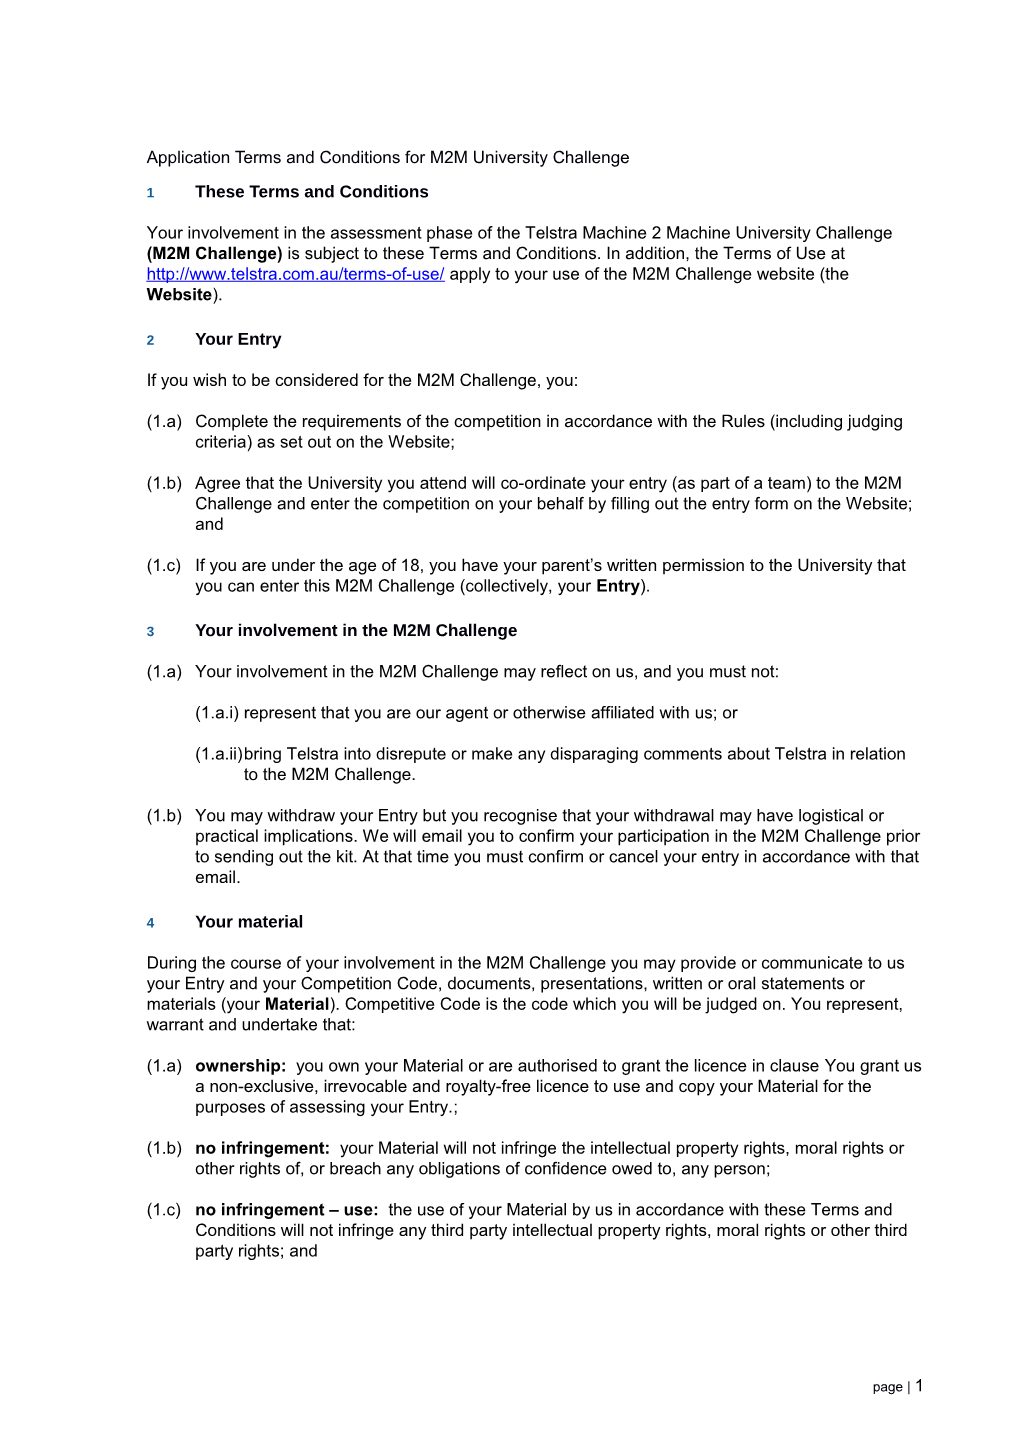 Application Terms and Conditions for M2M University Challenge